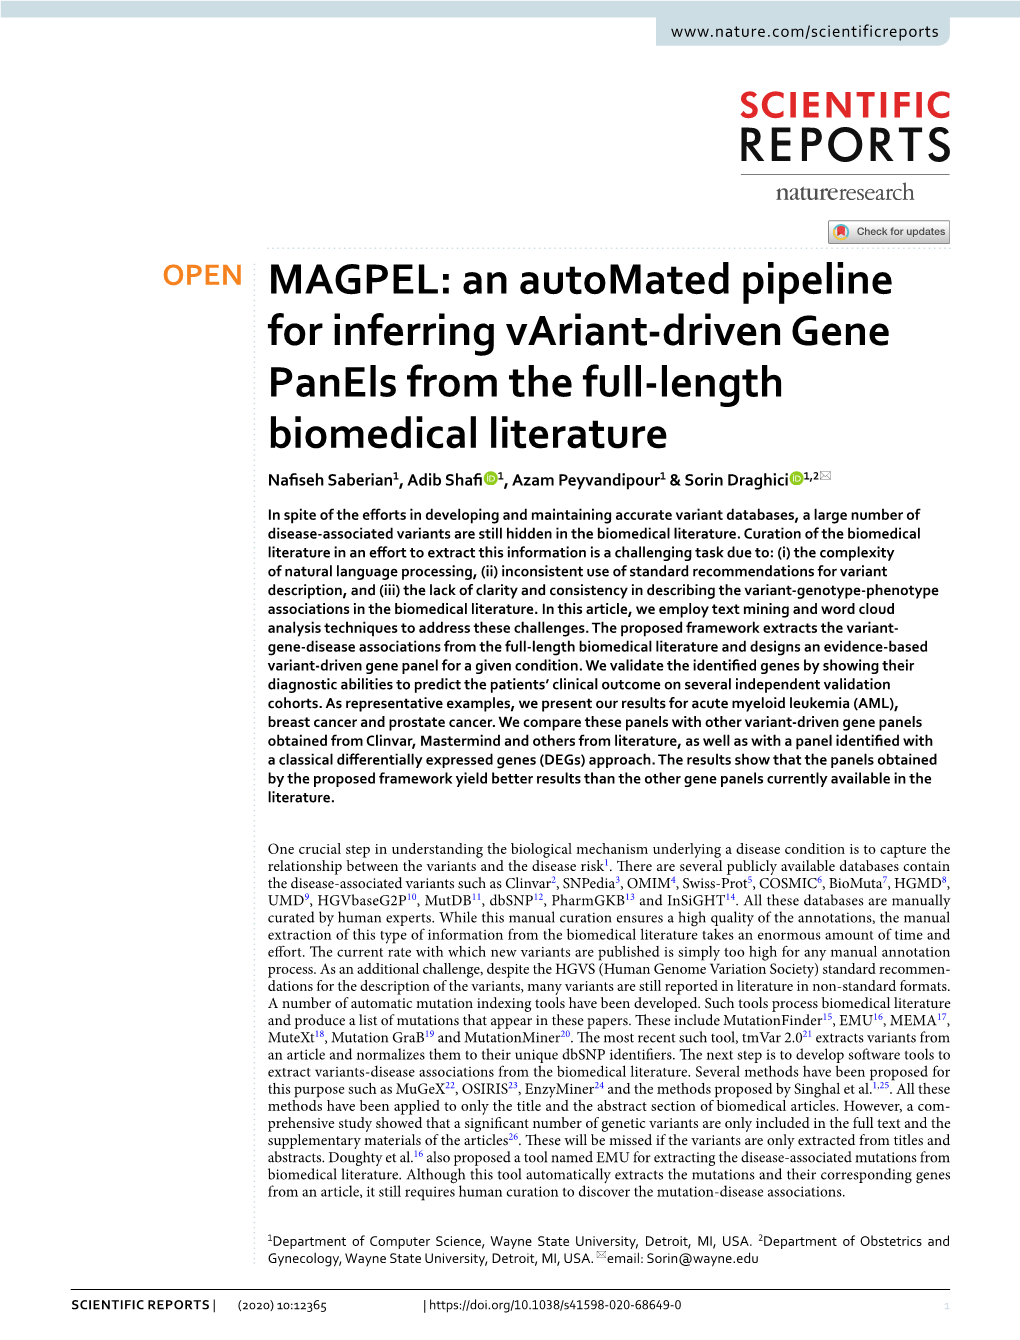 An Automated Pipeline for Inferring Variant-Driven Gene